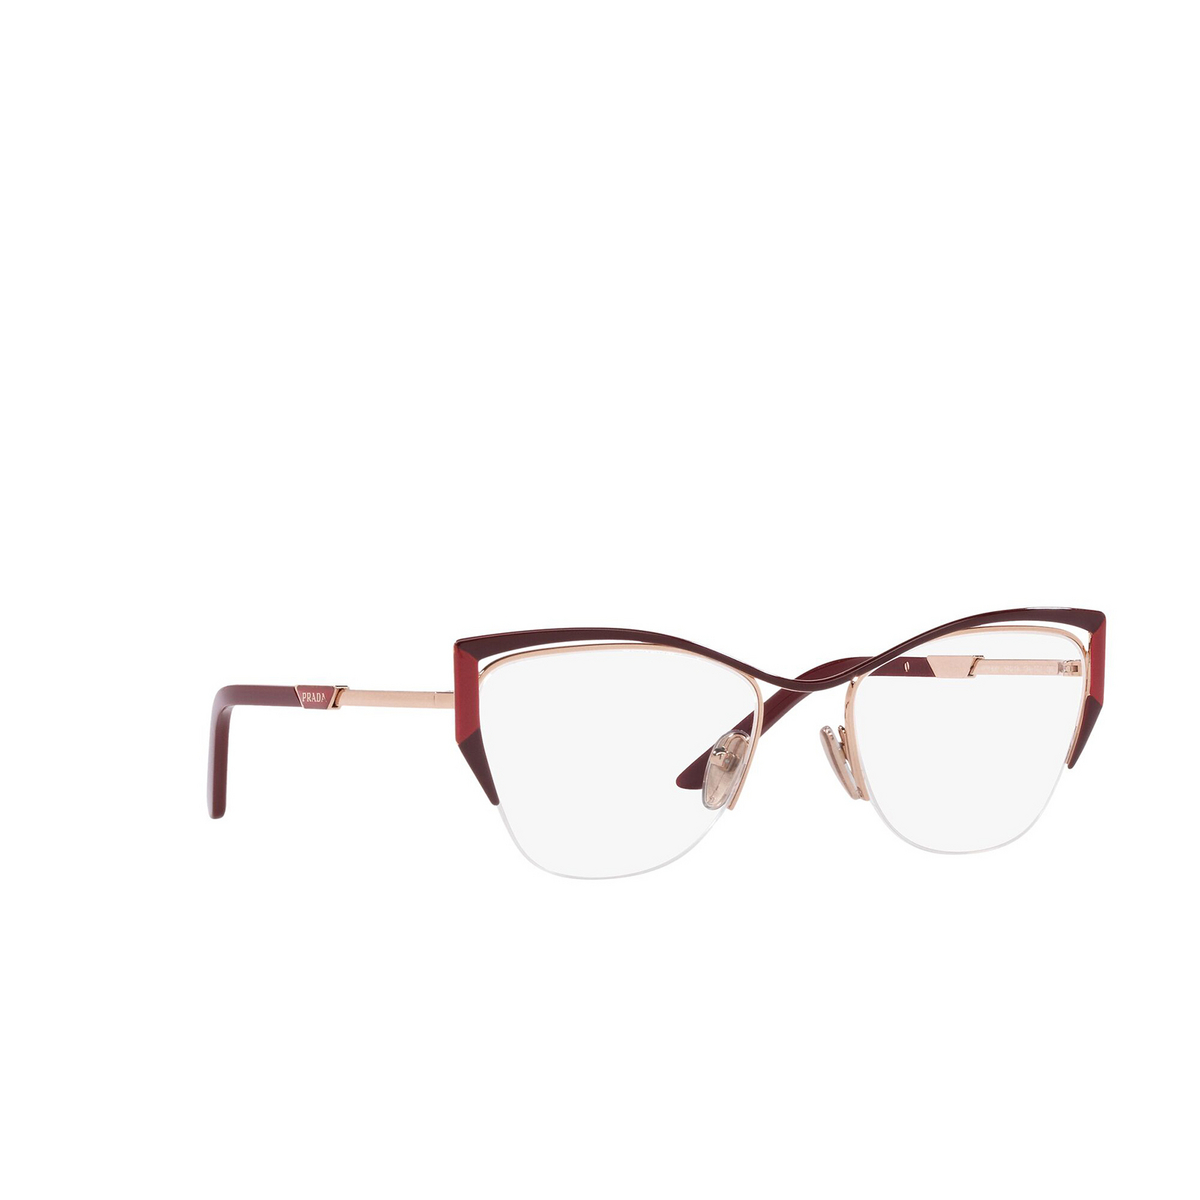 Prada® Butterfly Eyeglasses: PR 63YV color 13A1O1 Red / Fire / Rose Gold - three-quarters view